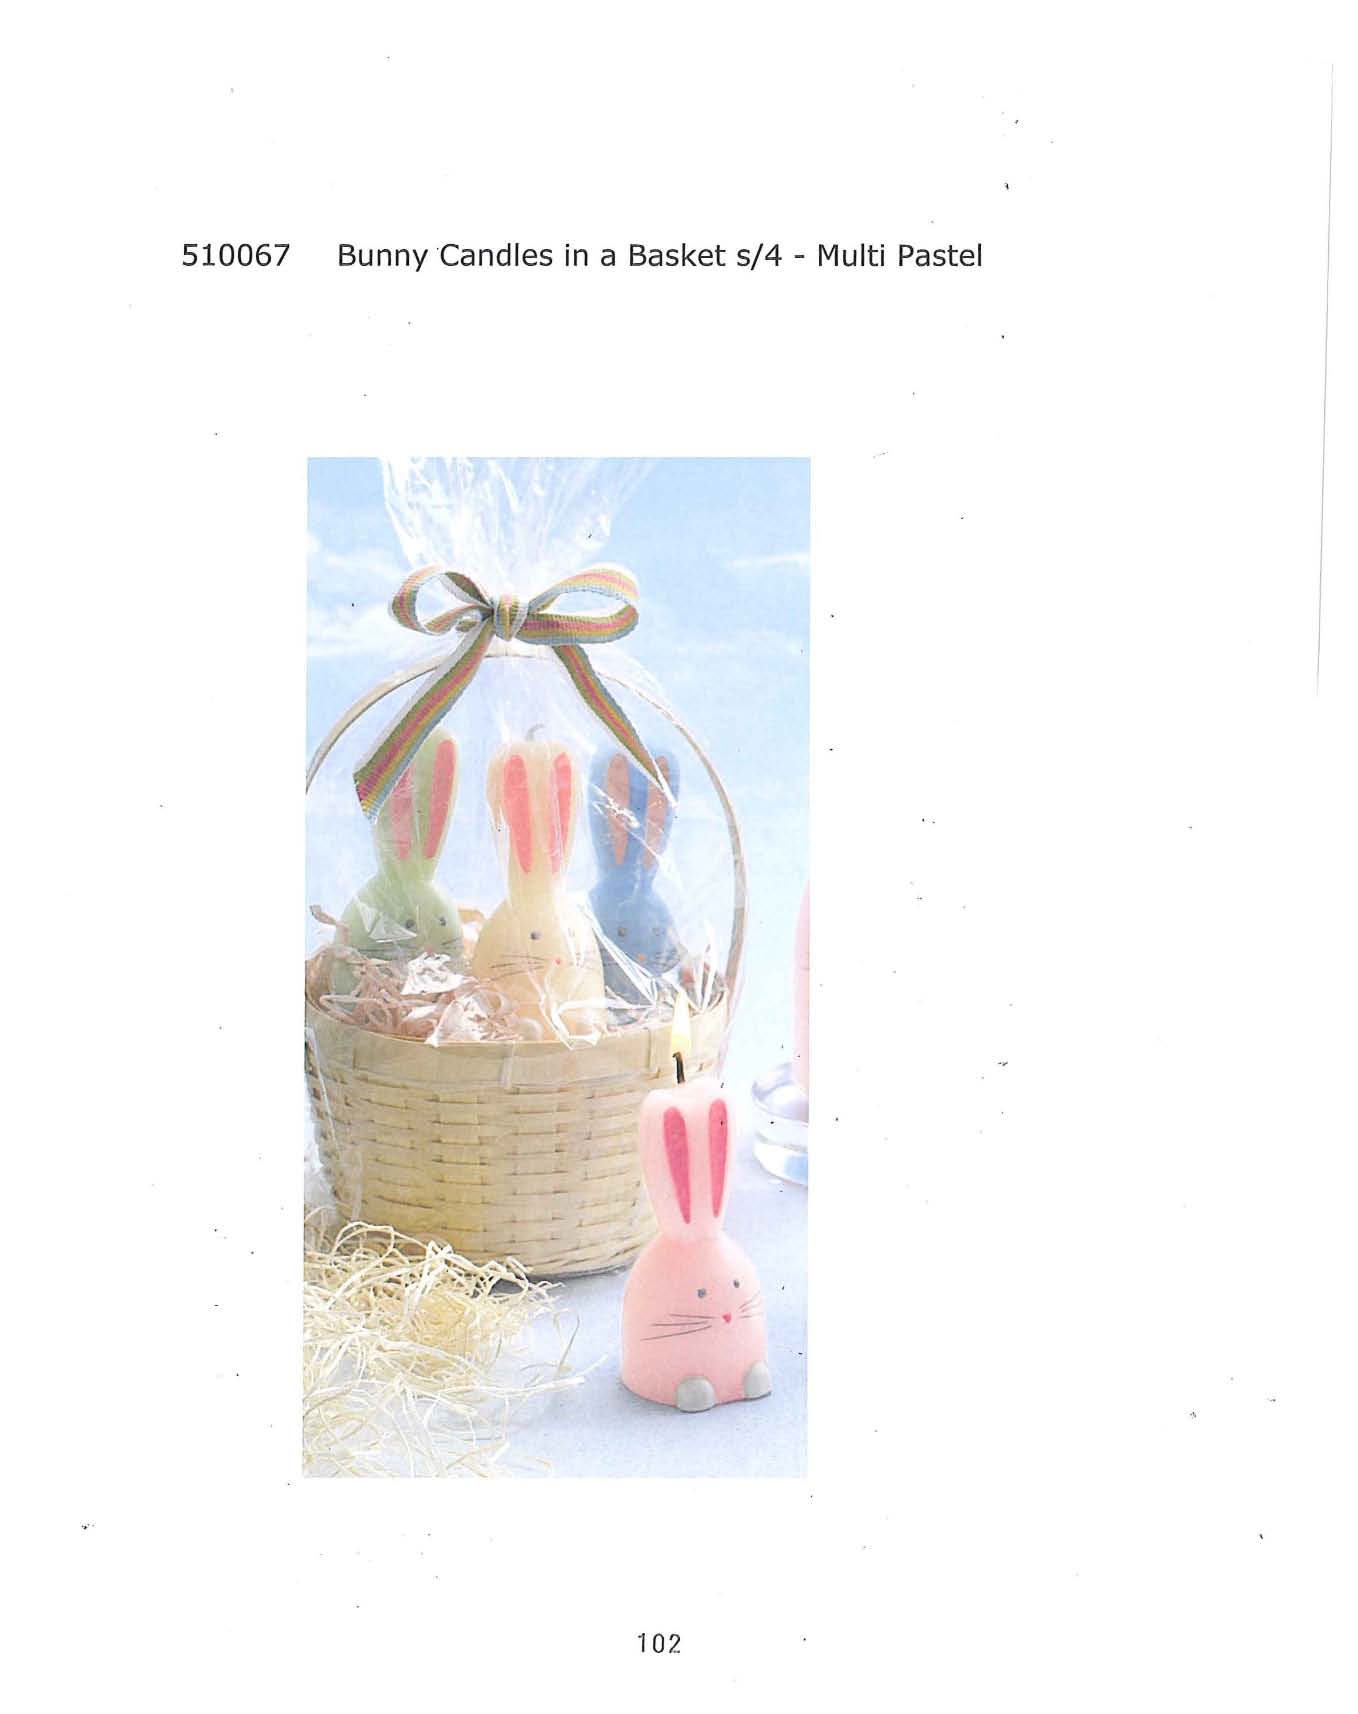 Bunny Candles in a Basket s/4